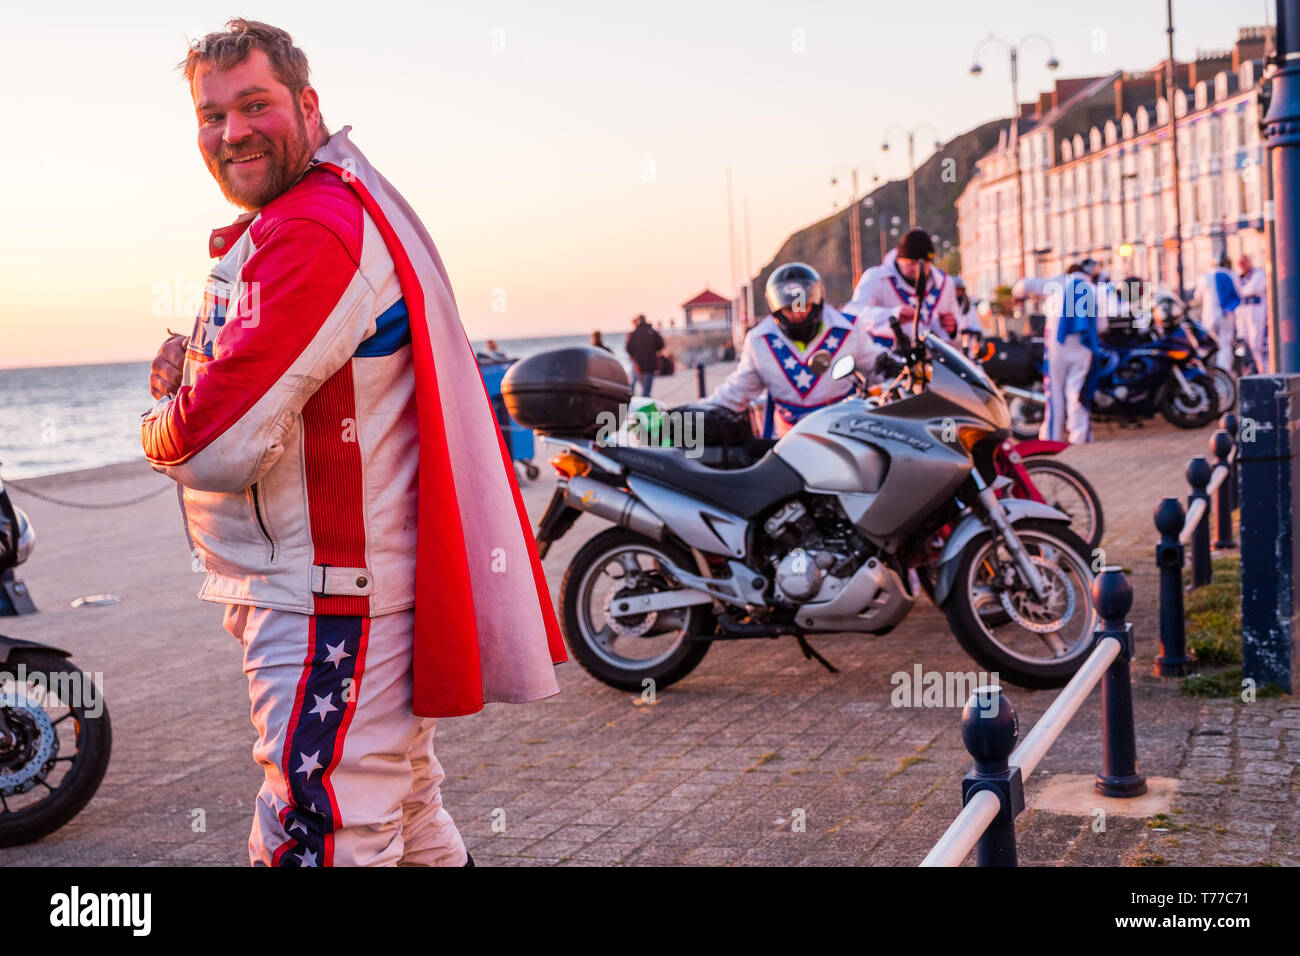 Aberystwyth, Wales. 04th May, 2019.   Some of the 50 motor bikers, all dressed as iconic stunt rider  'Evel Kneivel' arrive in Aberystwyth a dusk  as part of their annual charity fund raising ride around wales.  Now in its 8th year, the bikers start and finish in Wrexham and take 5 days to ride the 1070 mile perimiter of Wales, raising money for Macmillan Cancer Support, ending on Bank Holiday Monday   Credit: keith morris/Alamy Live News Stock Photo